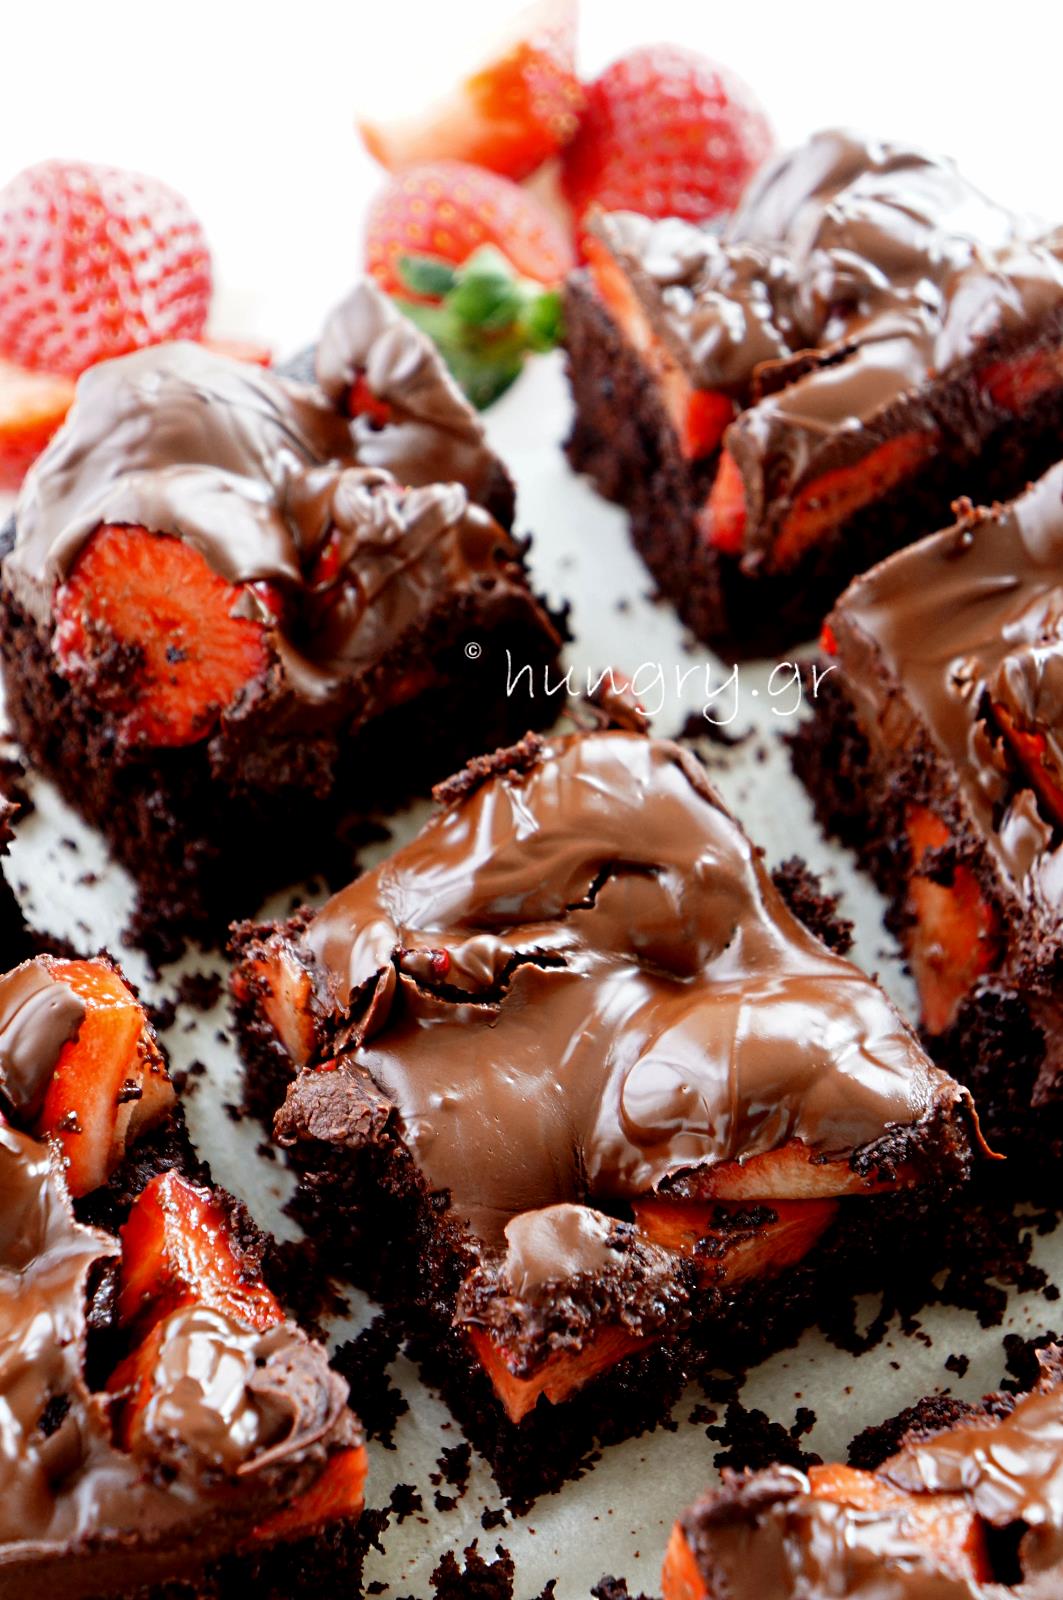 Kitchen Stories: Chocolate Covered Strawberry Brownies